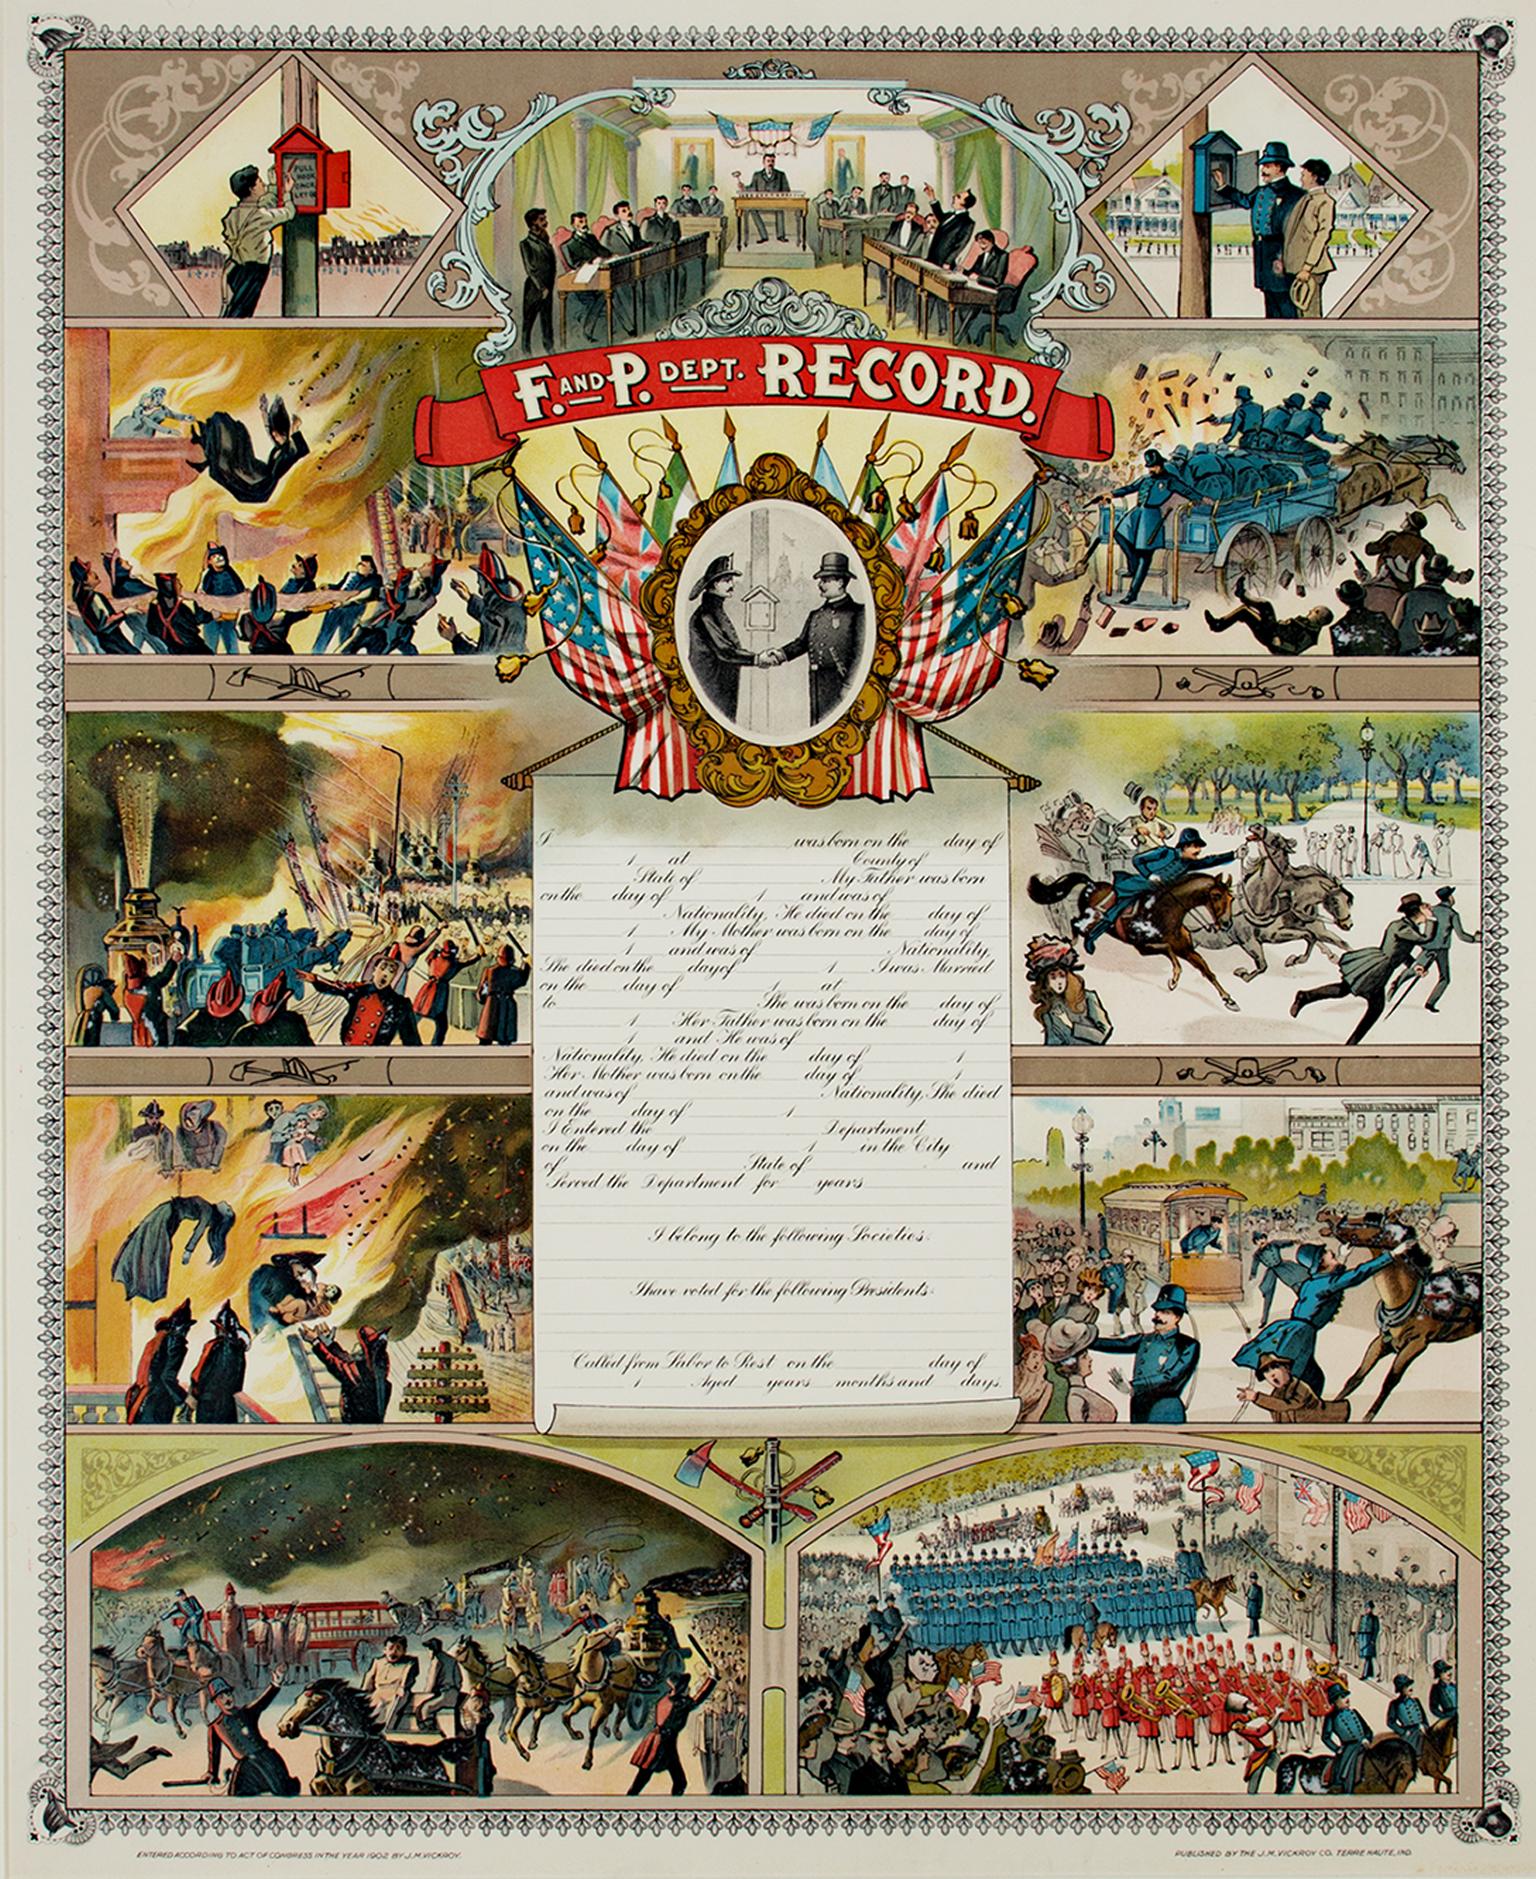 J.M. Vickroy & Co. Figurative Print – „Fire and Police Department Record“, Chromolithographie von J.M. Krokodilleder & Co